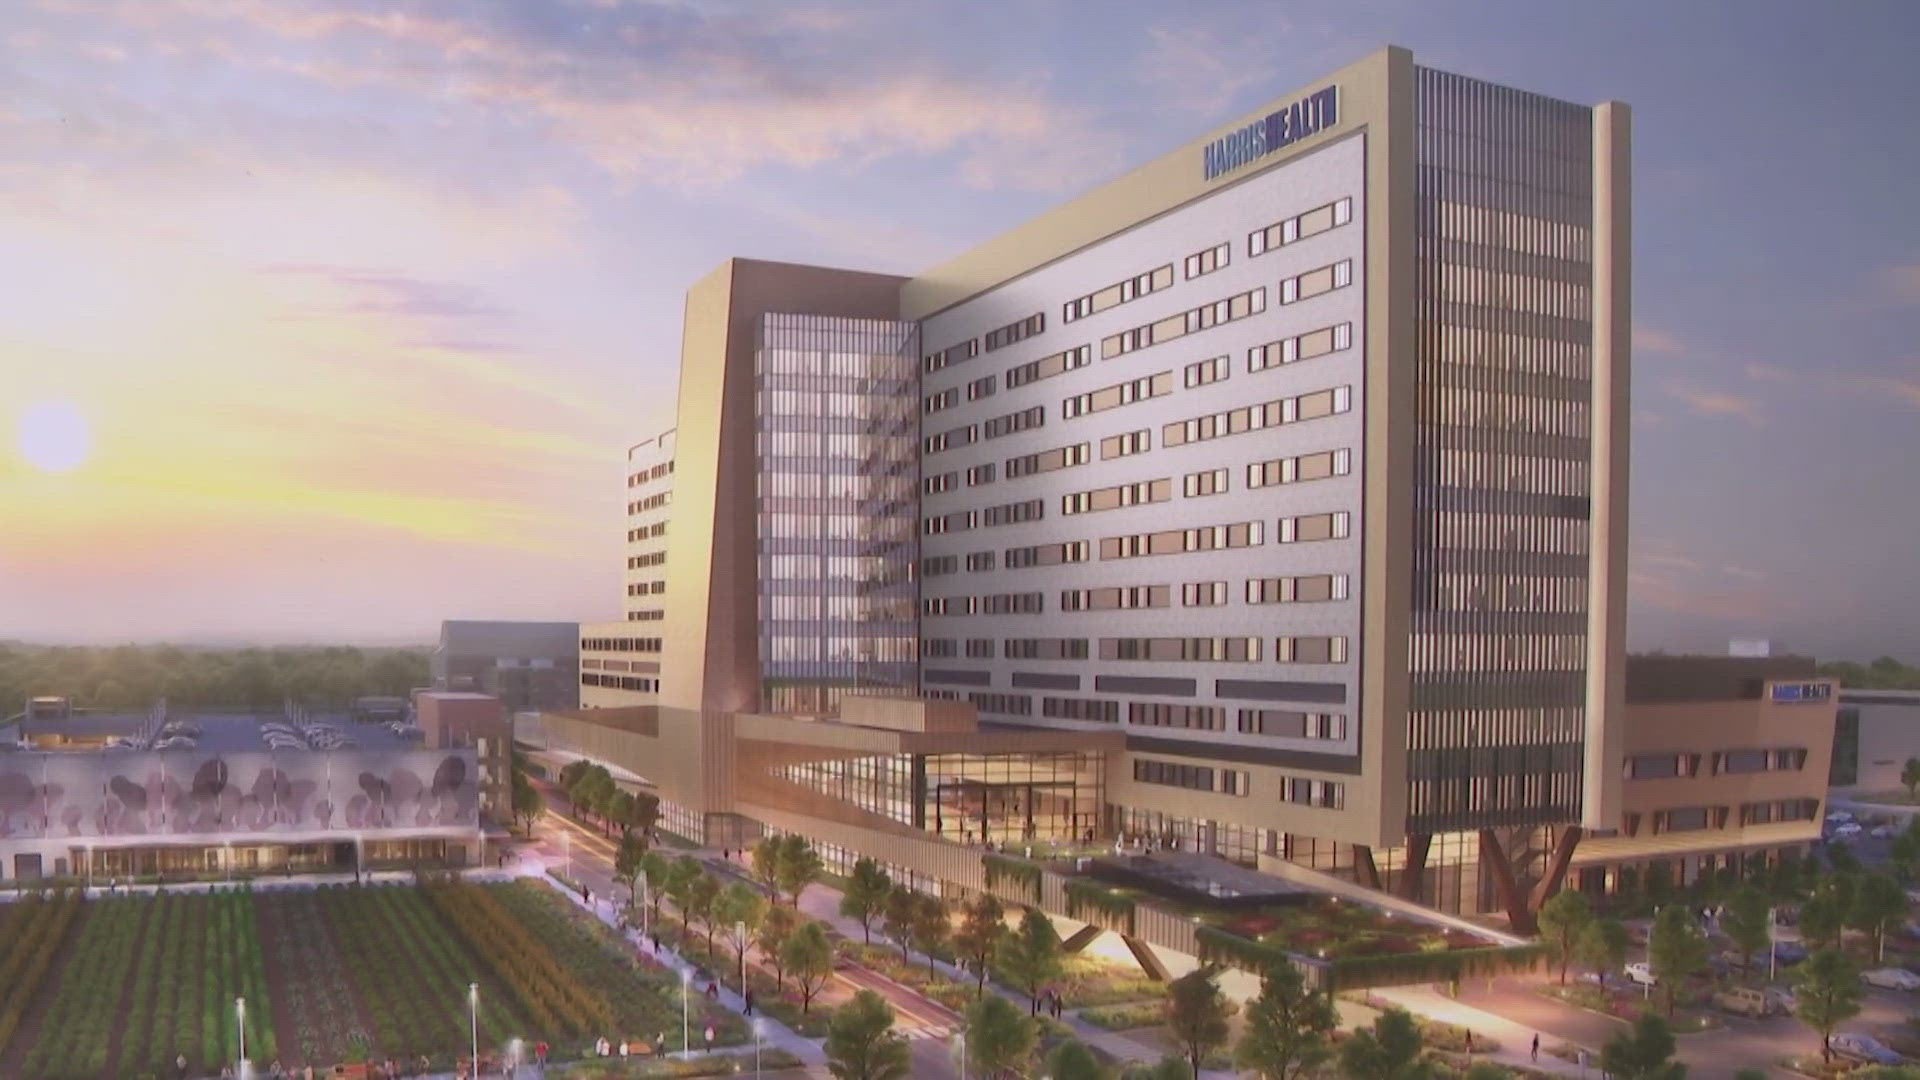 A ceremonial groundbreaking event was held for an expansion of the LBJ Hospital campus.